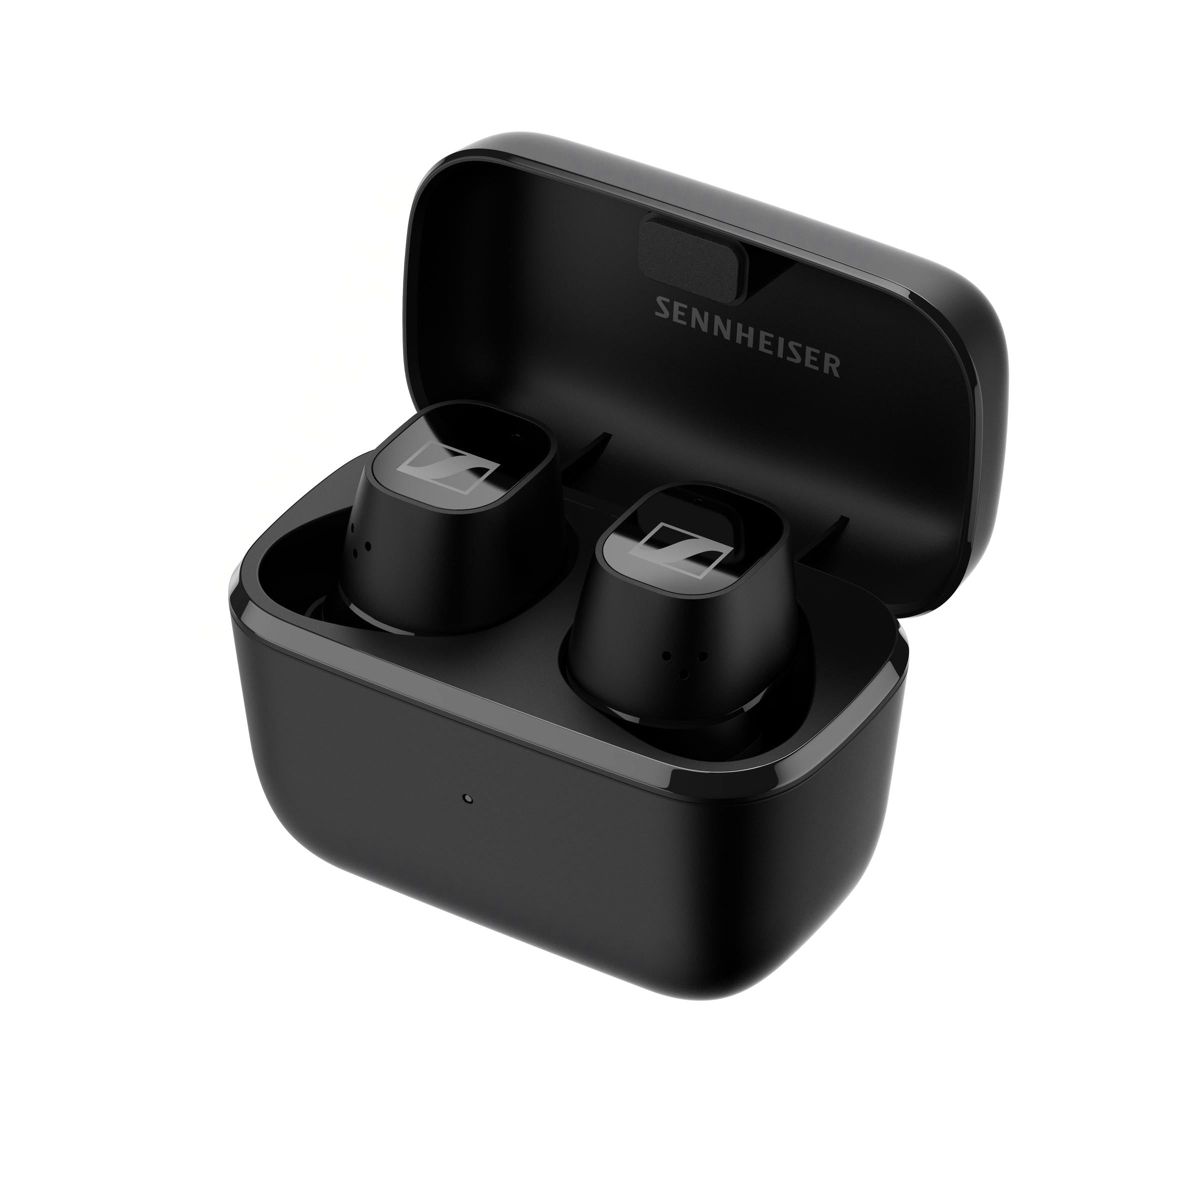 Sennheiser Cx True Wireless Earbuds - Bluetooth In-ear Headphones For Music And Calls With Passive Noise Cancel In Black